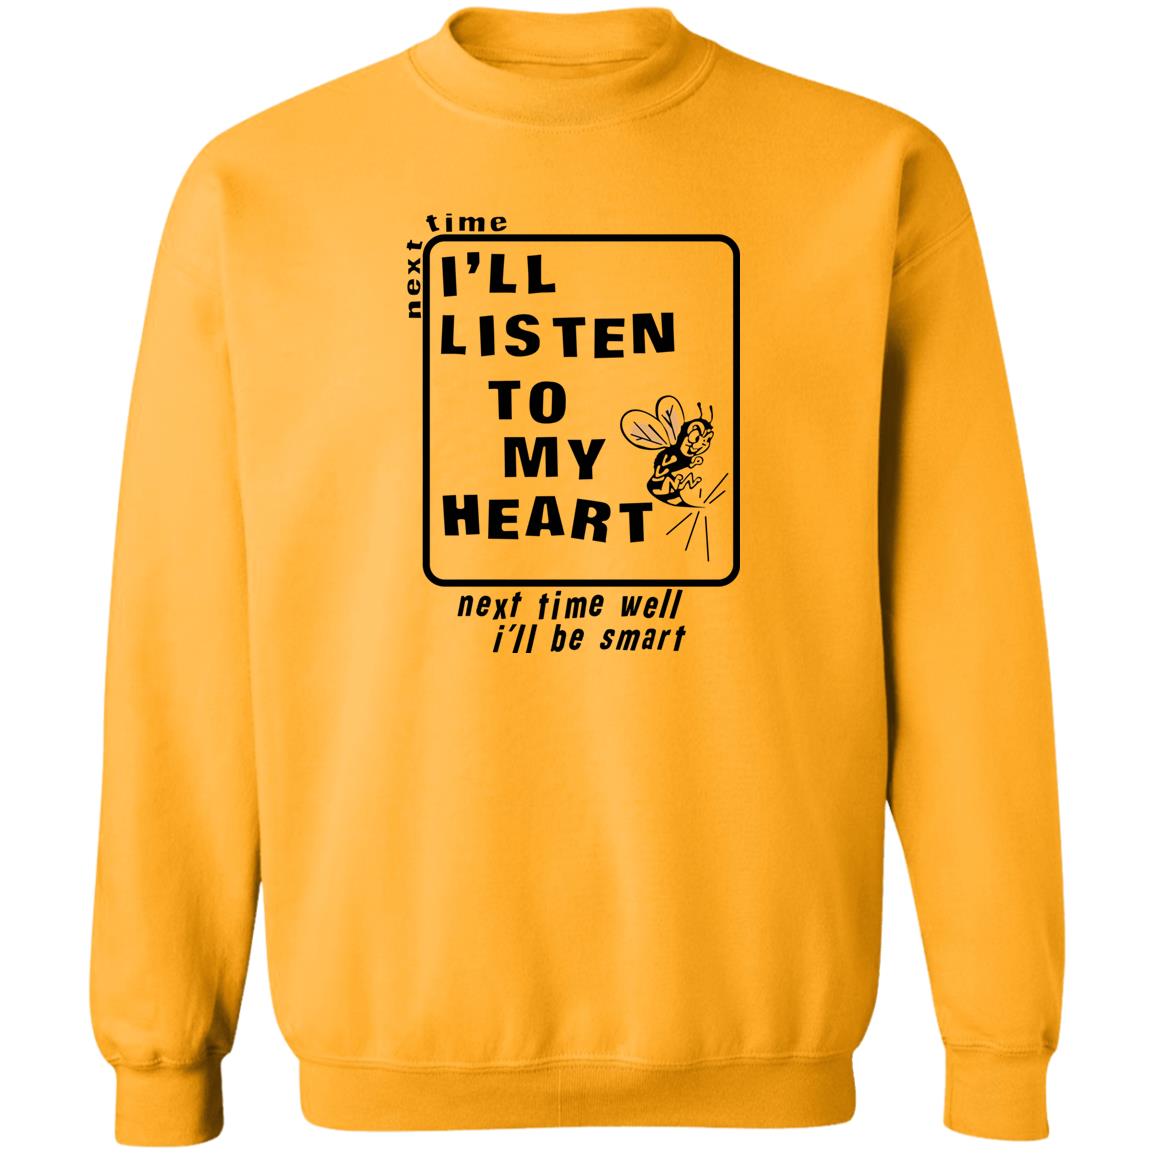 Next Time I’ll Listen To My Heart Next Time Well I’ll Be Smart Shirt 1